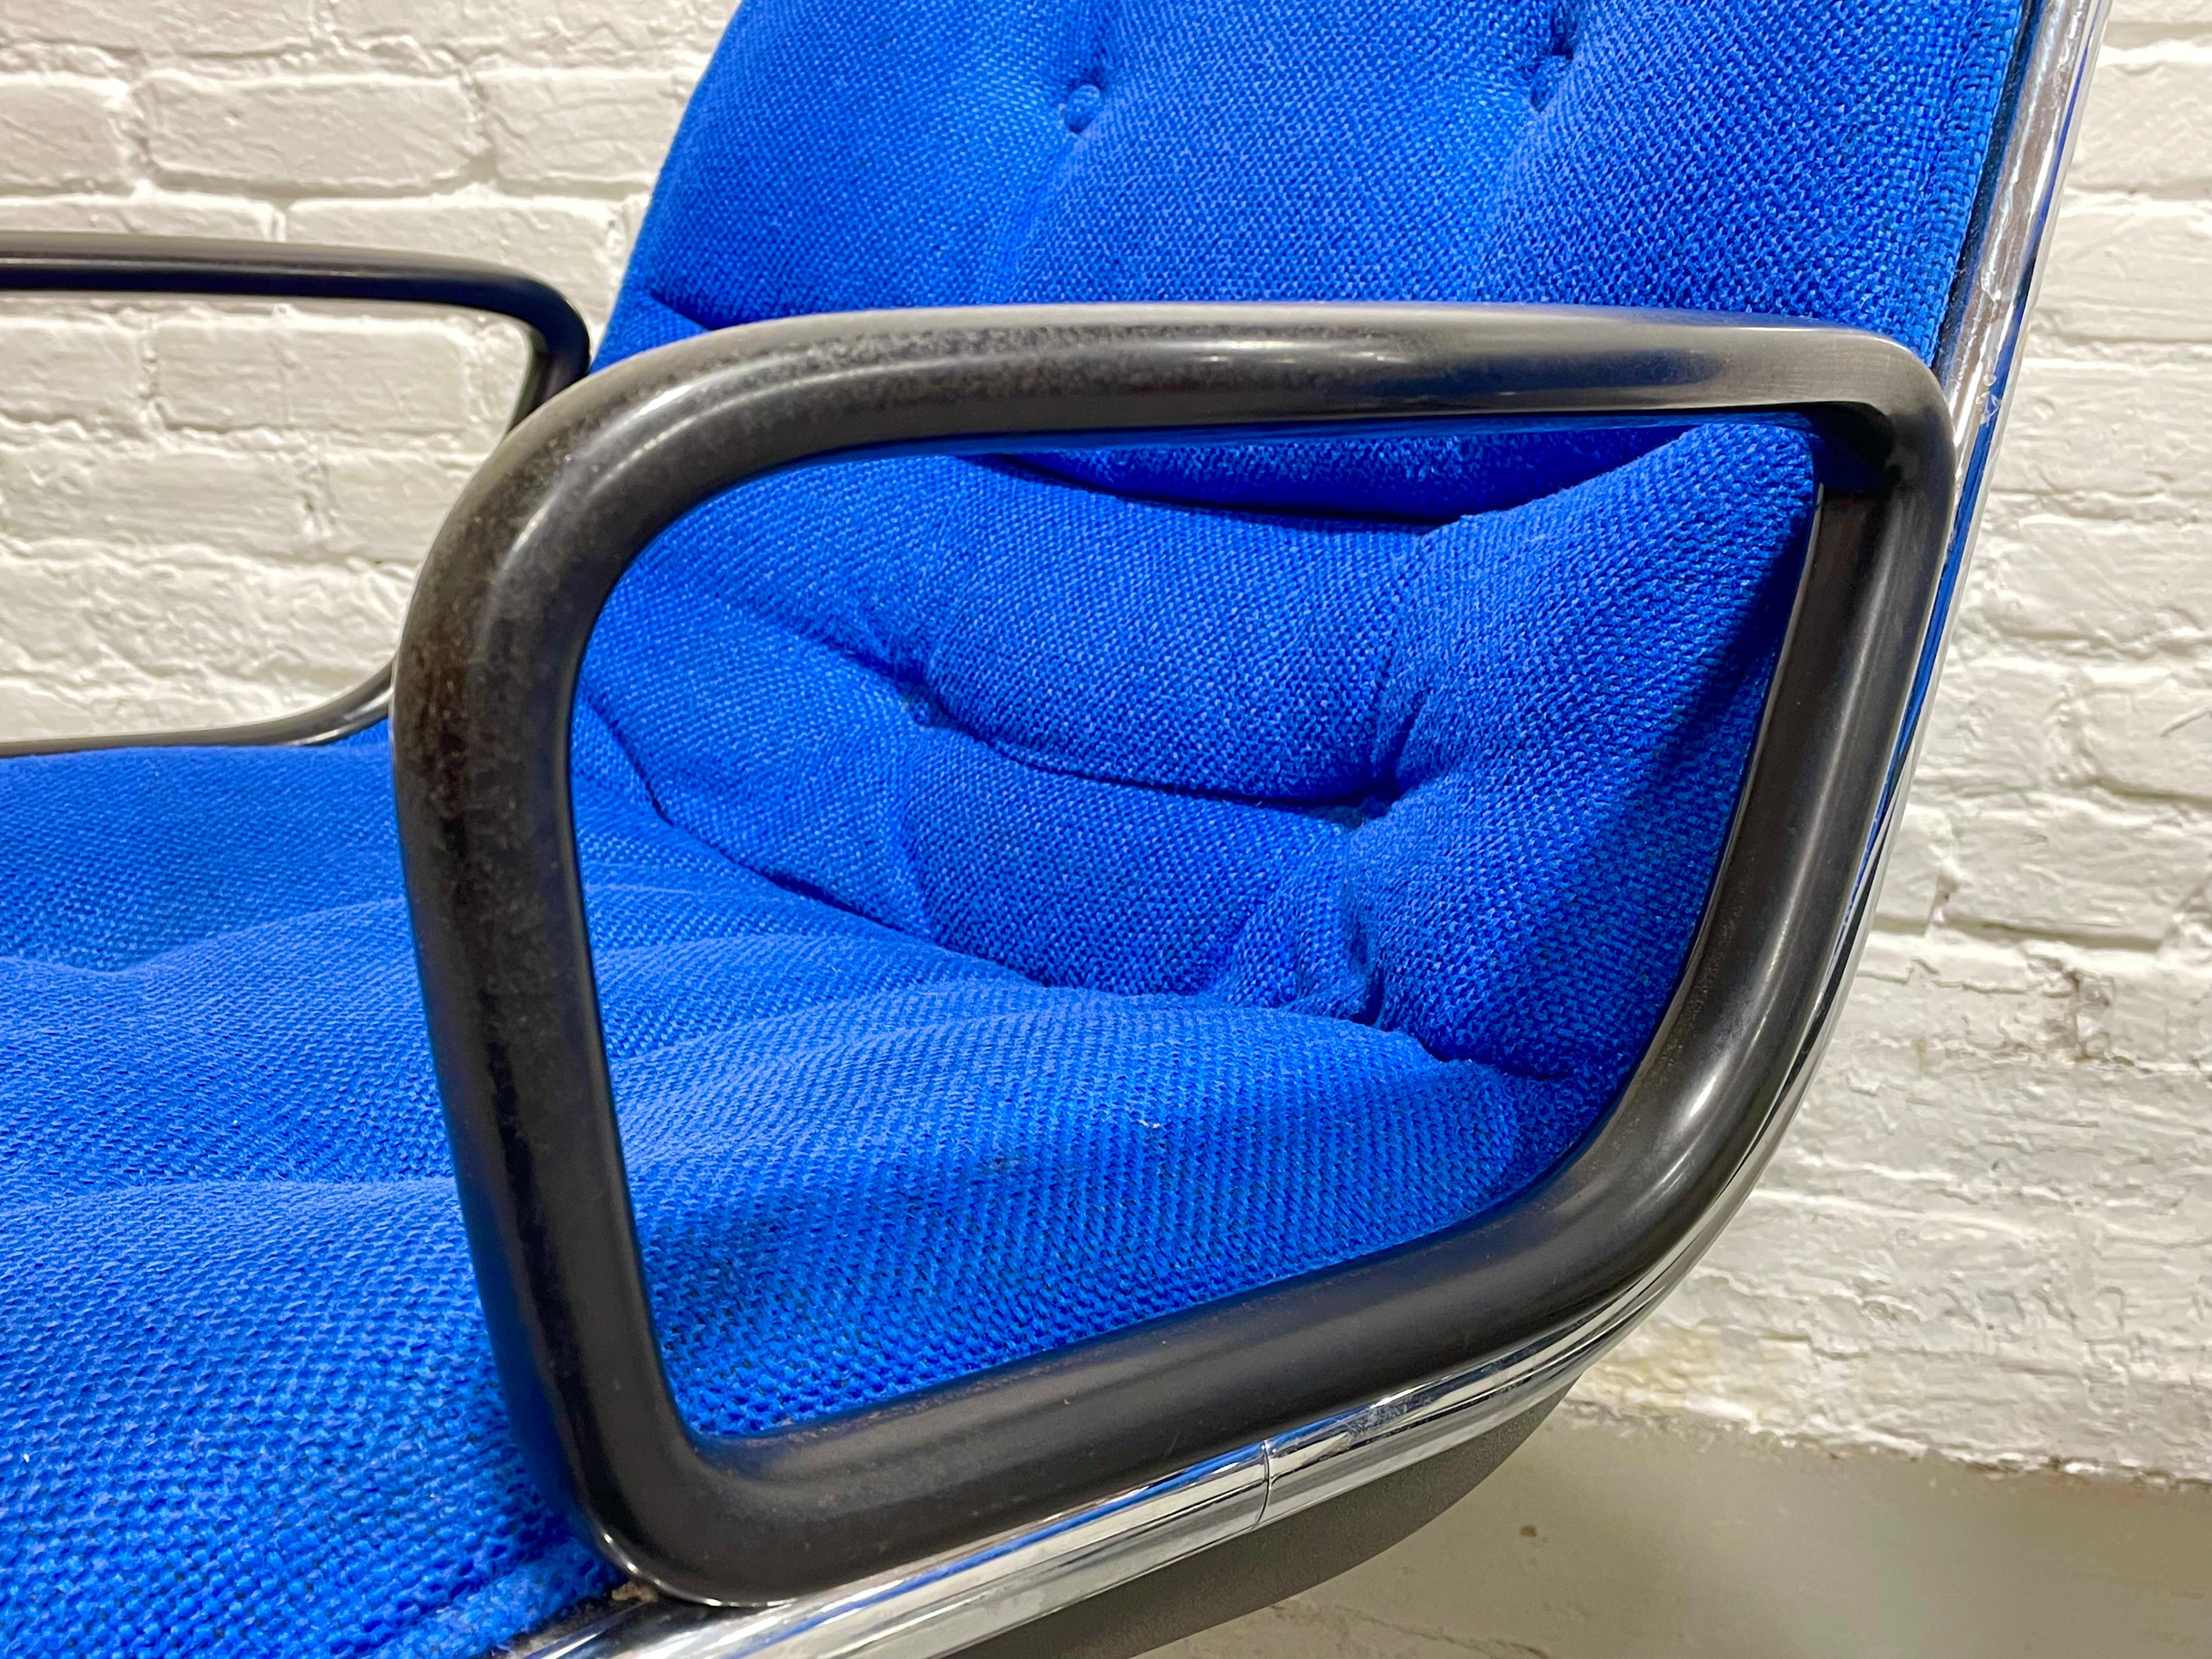 Fabric Royal Blue Mid-Century Modern Knoll Pollock Office Chair, Sold Individually